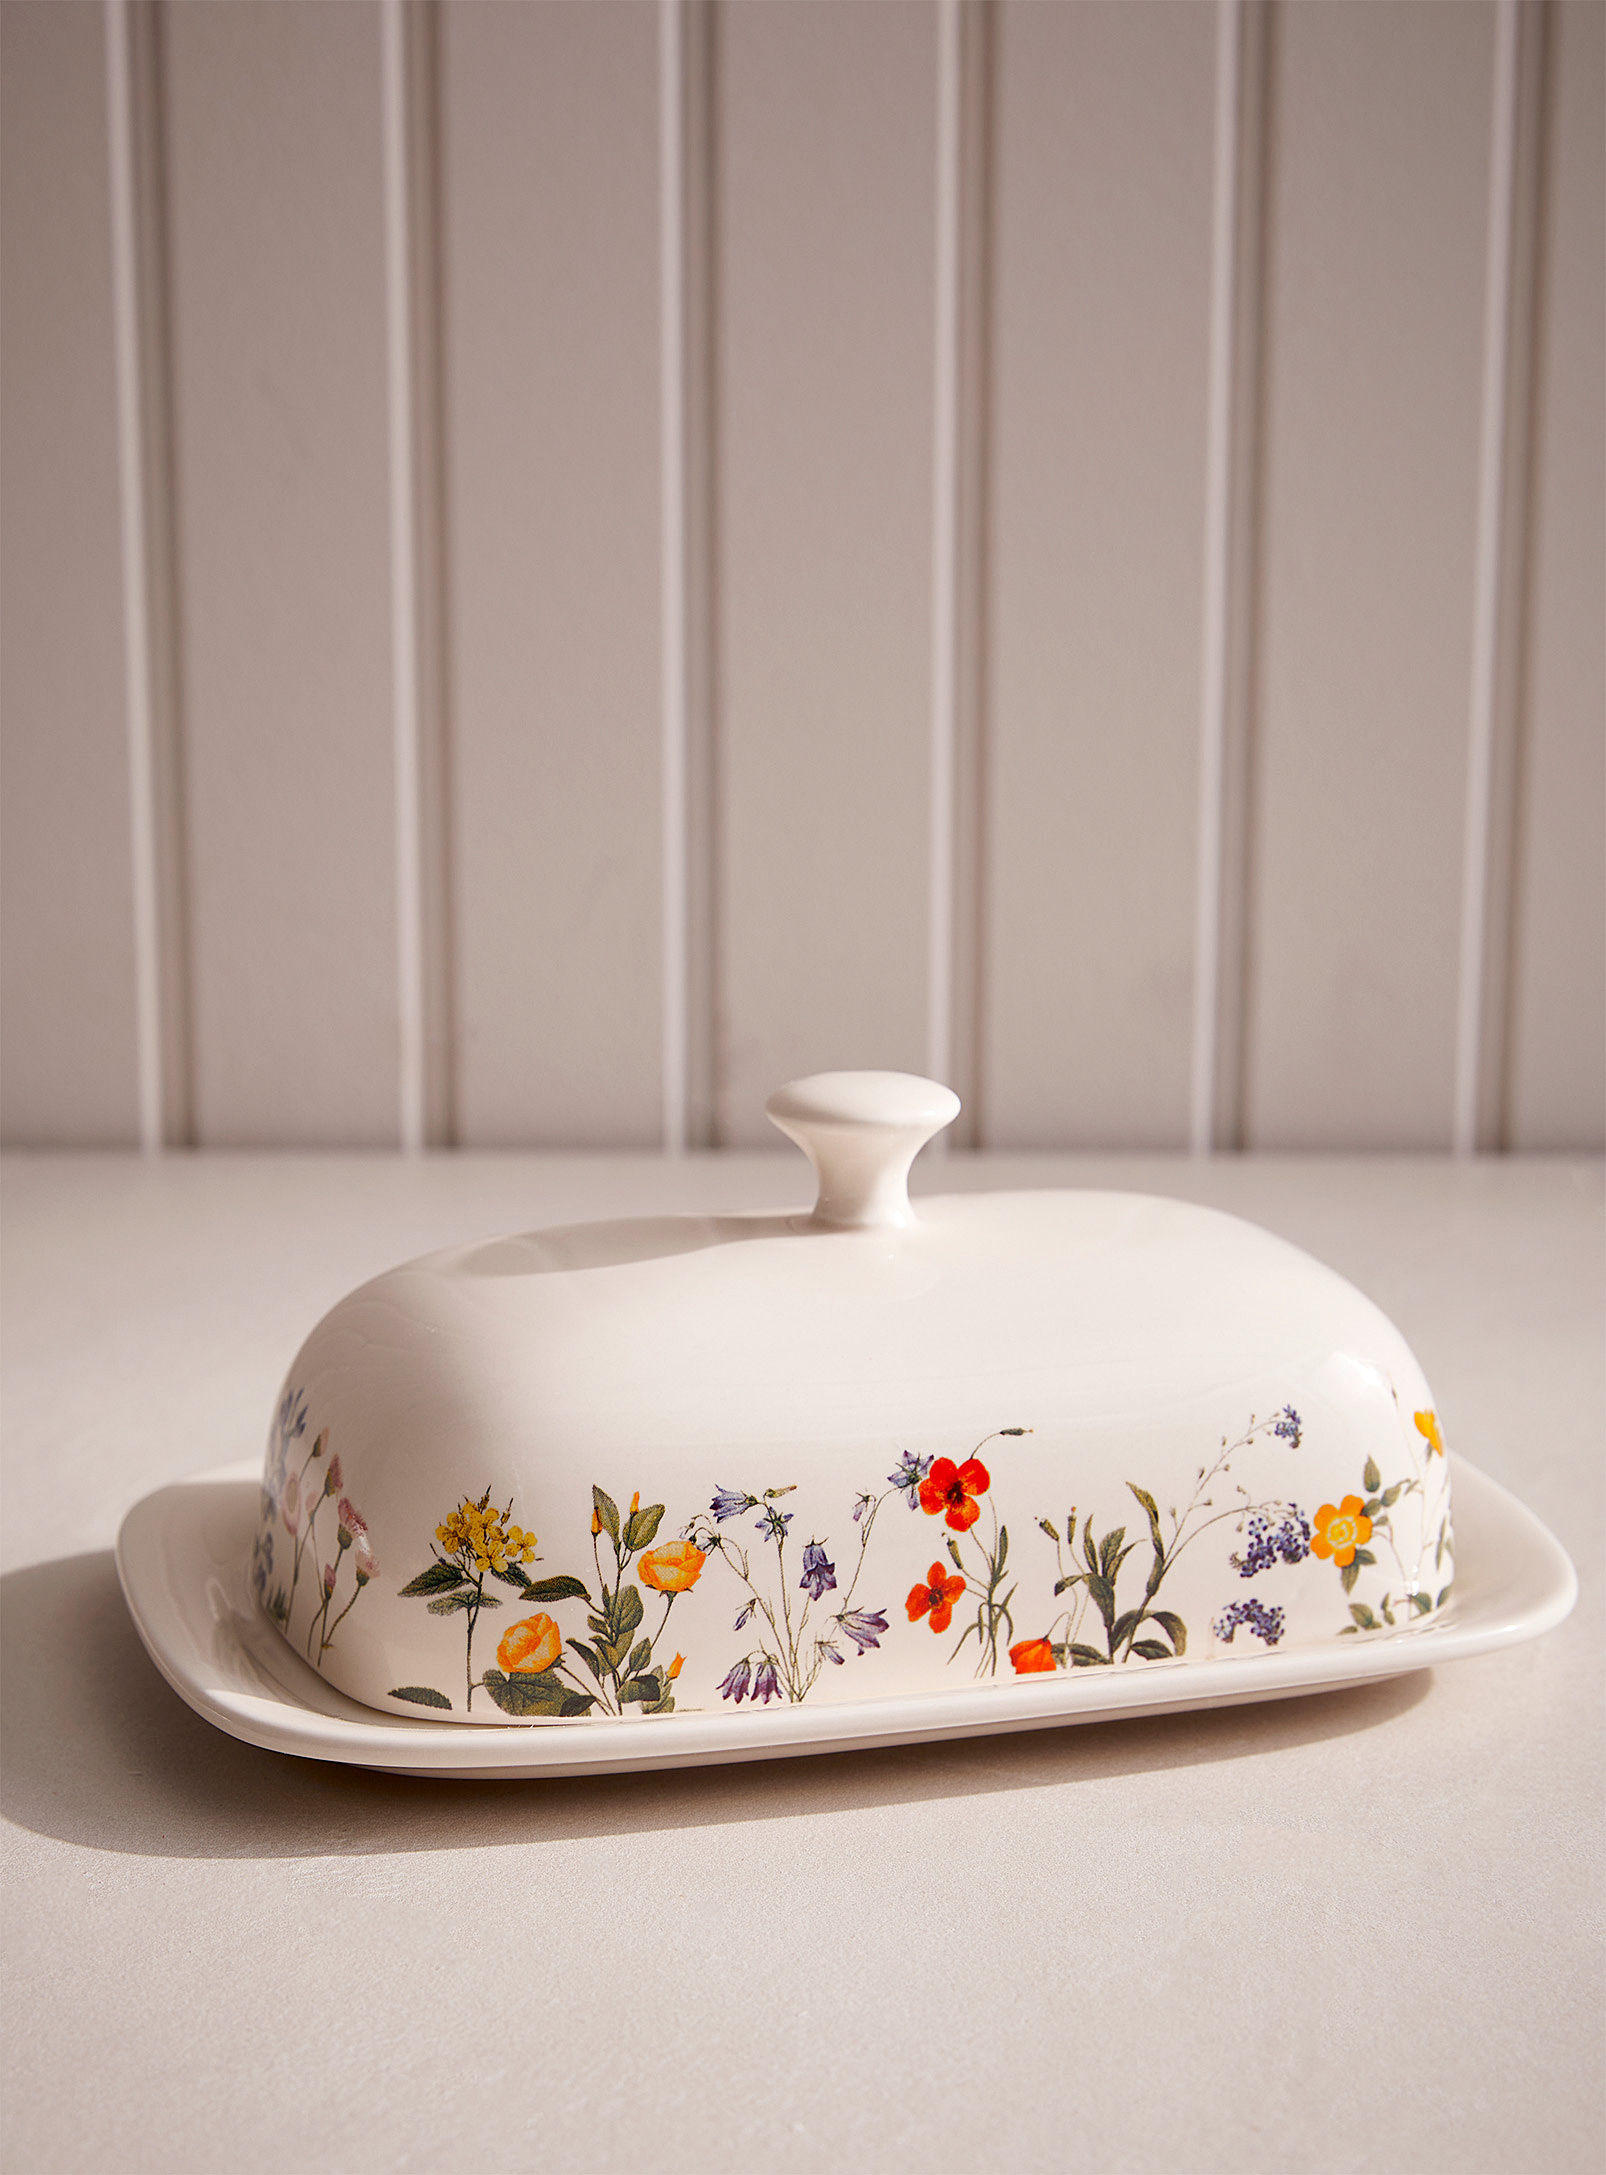 Simons Maison Dried Flowers Butter Dish In Black